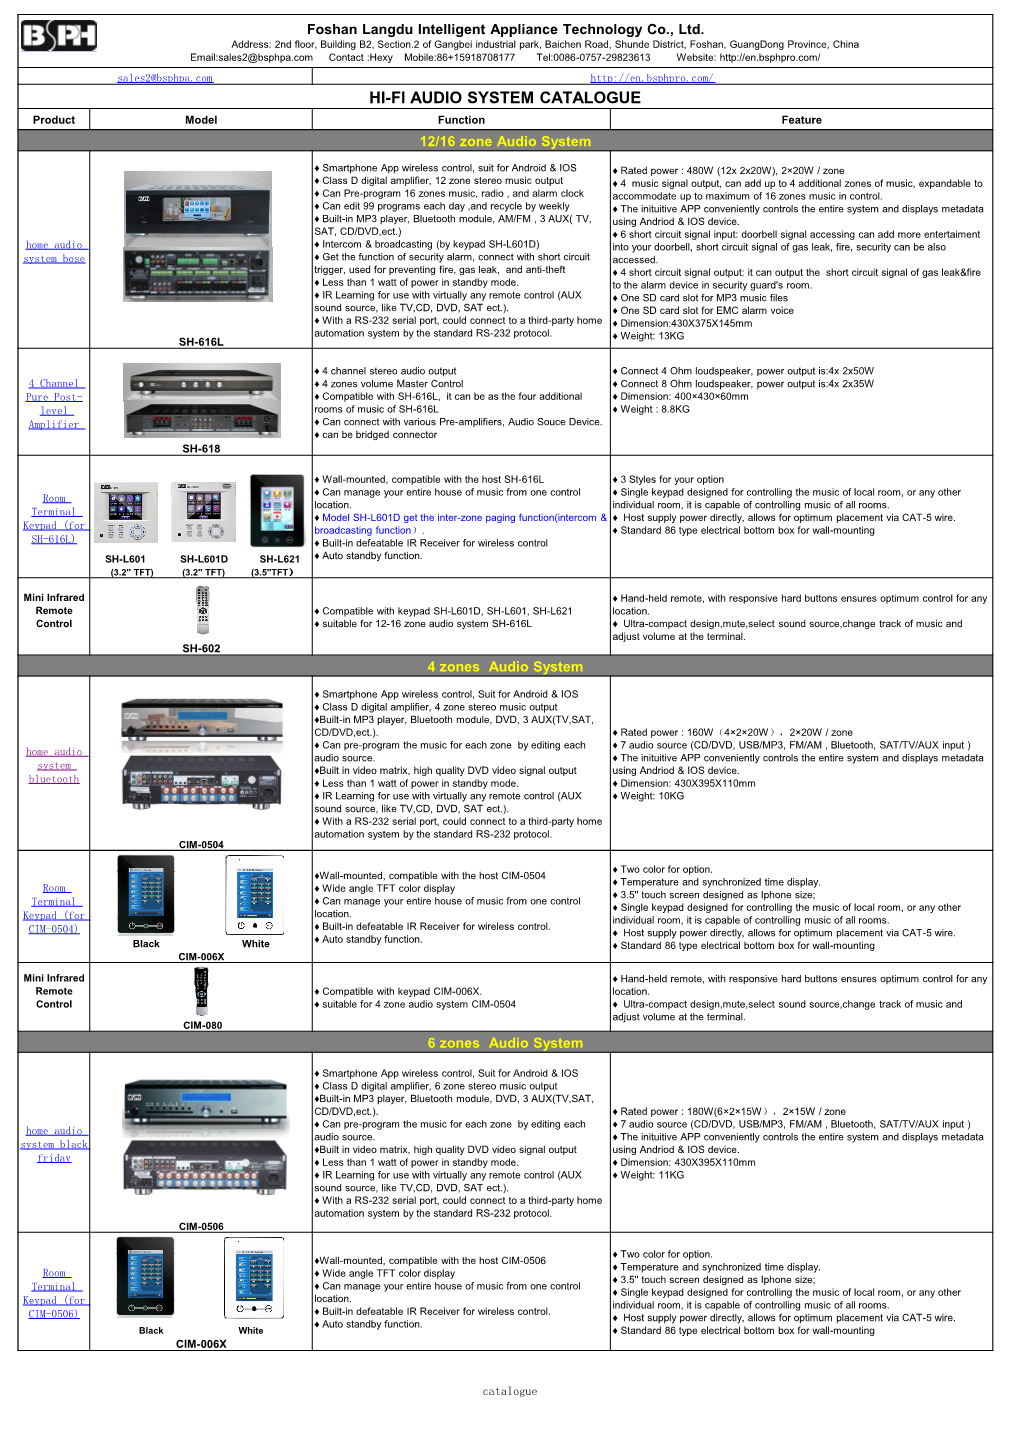 HI-FI AUDIO SYSTEM CATALOGUE Product Model Function Feature 12/16 Zone Audio System